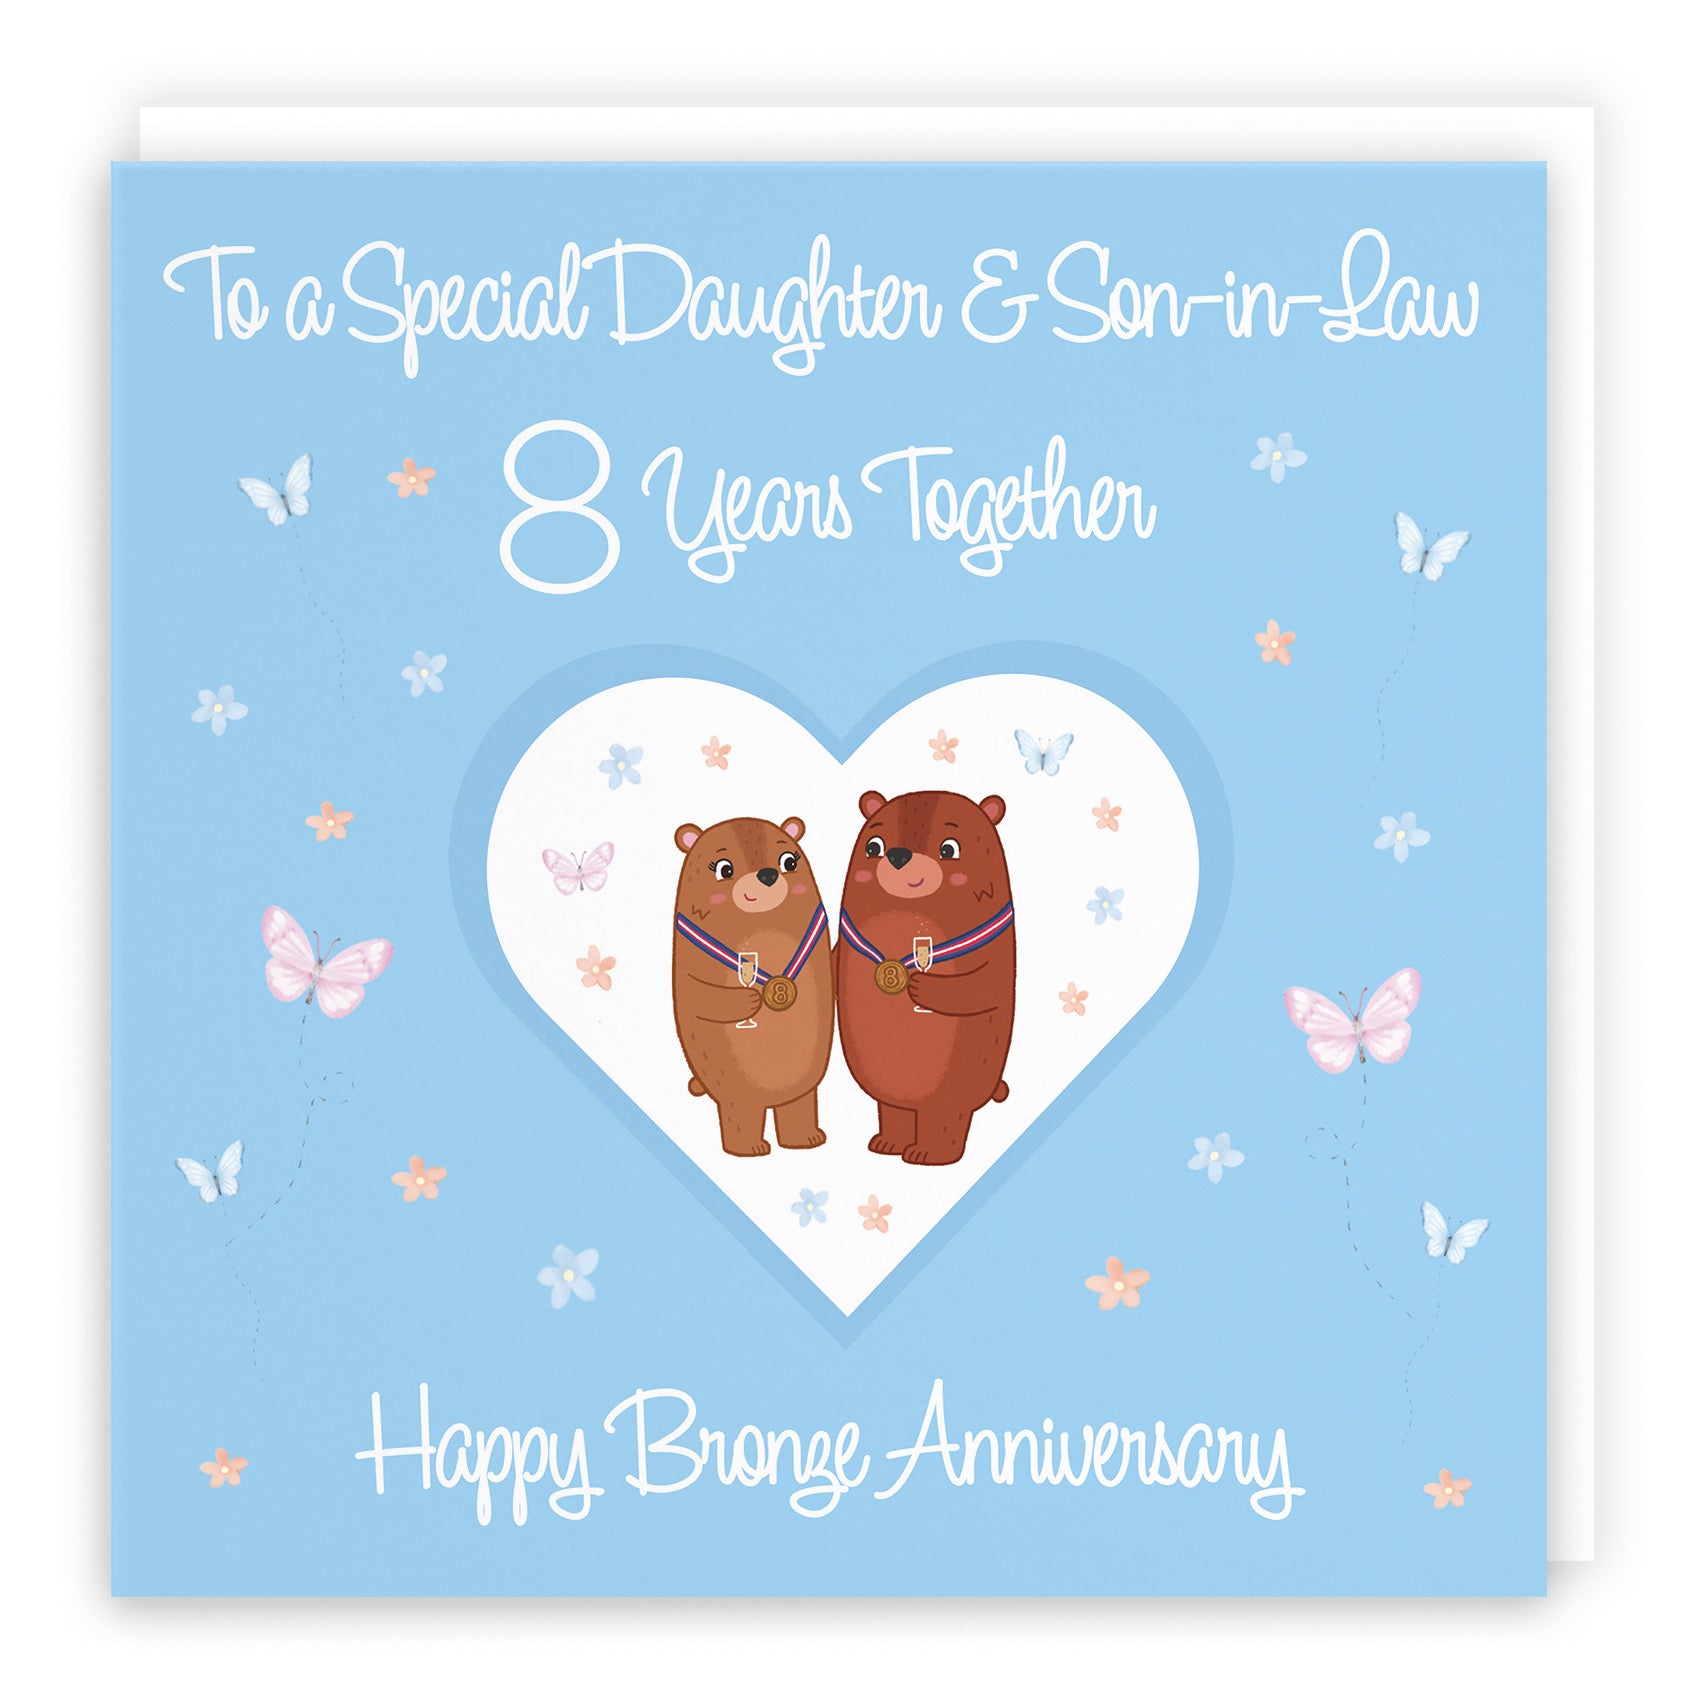 Large Daughter & Son-in-Law 8th Anniversary Card Romantic Meadows - Default Title (B0CXY4ZKRP)